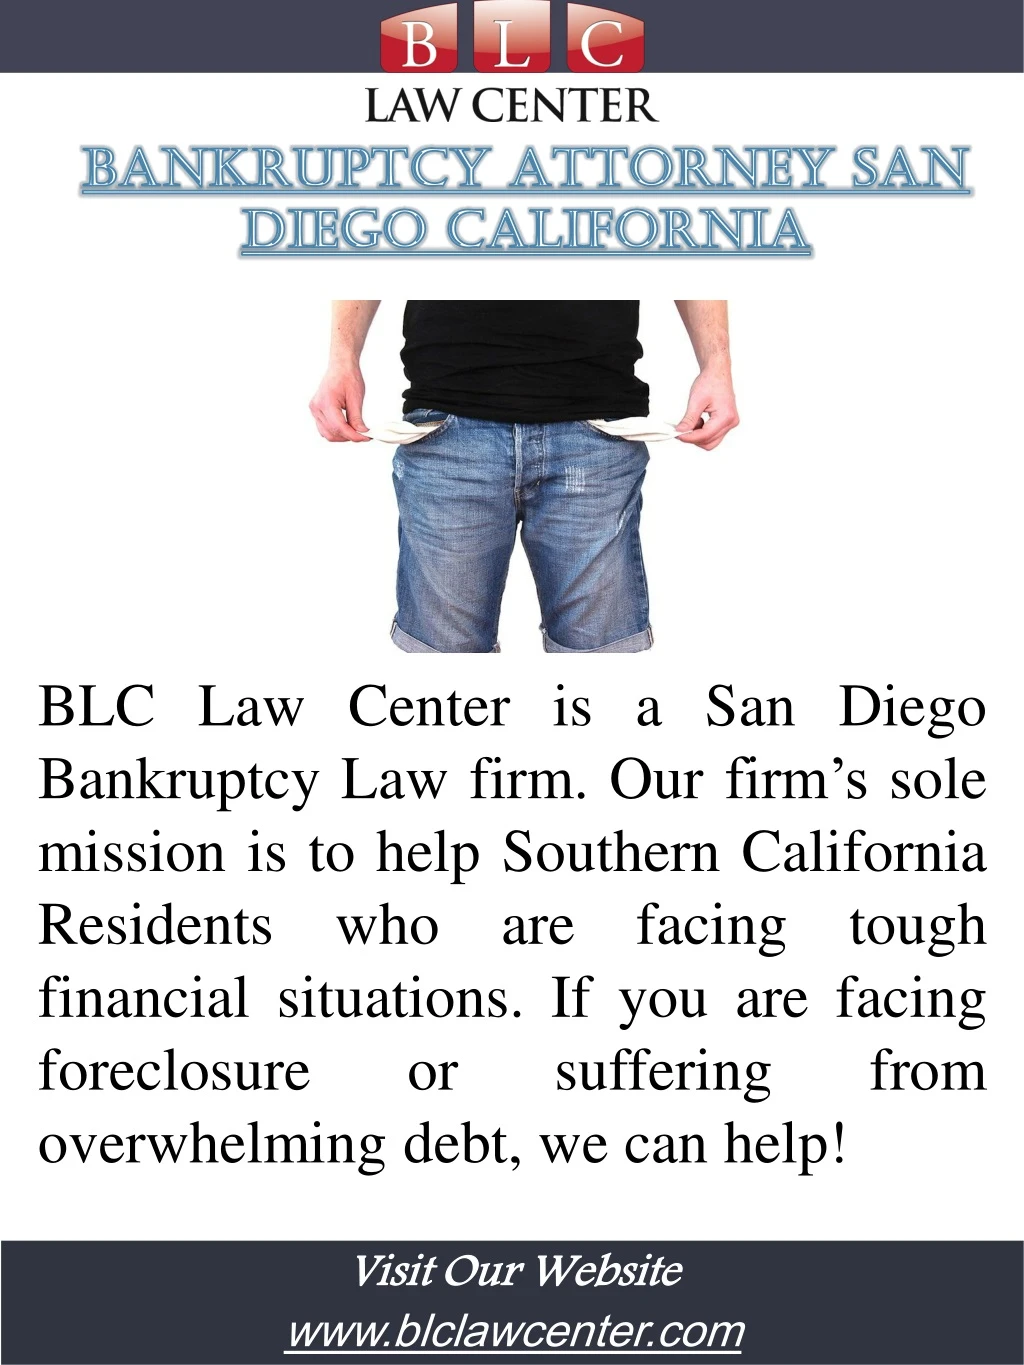 blc law center is a san diego bankruptcy law firm